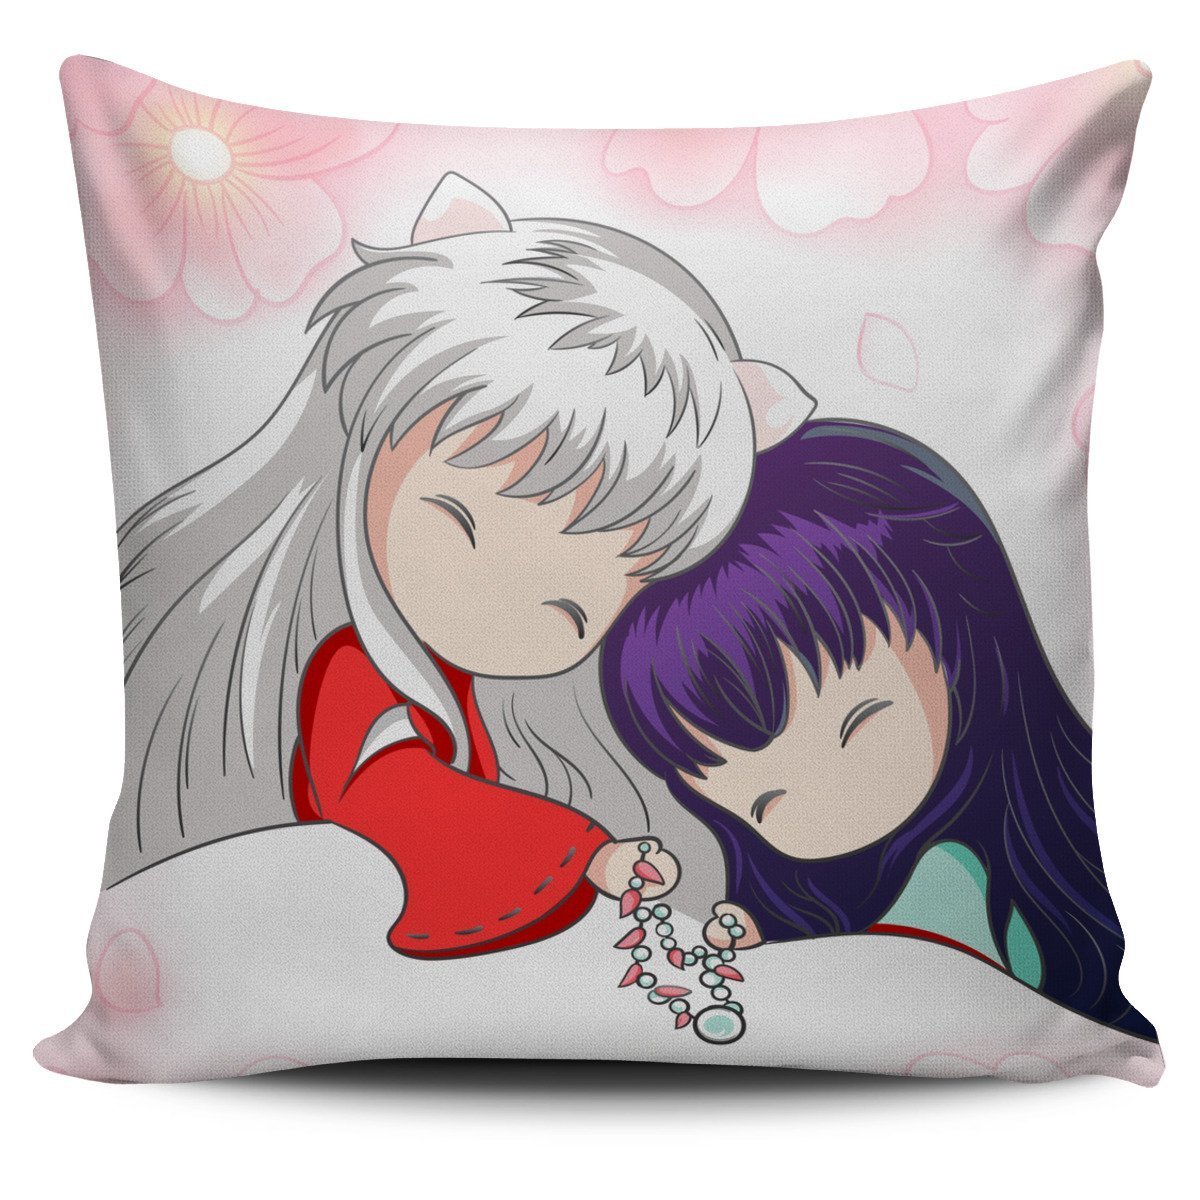 Inuyasha Couple Pillow Cover